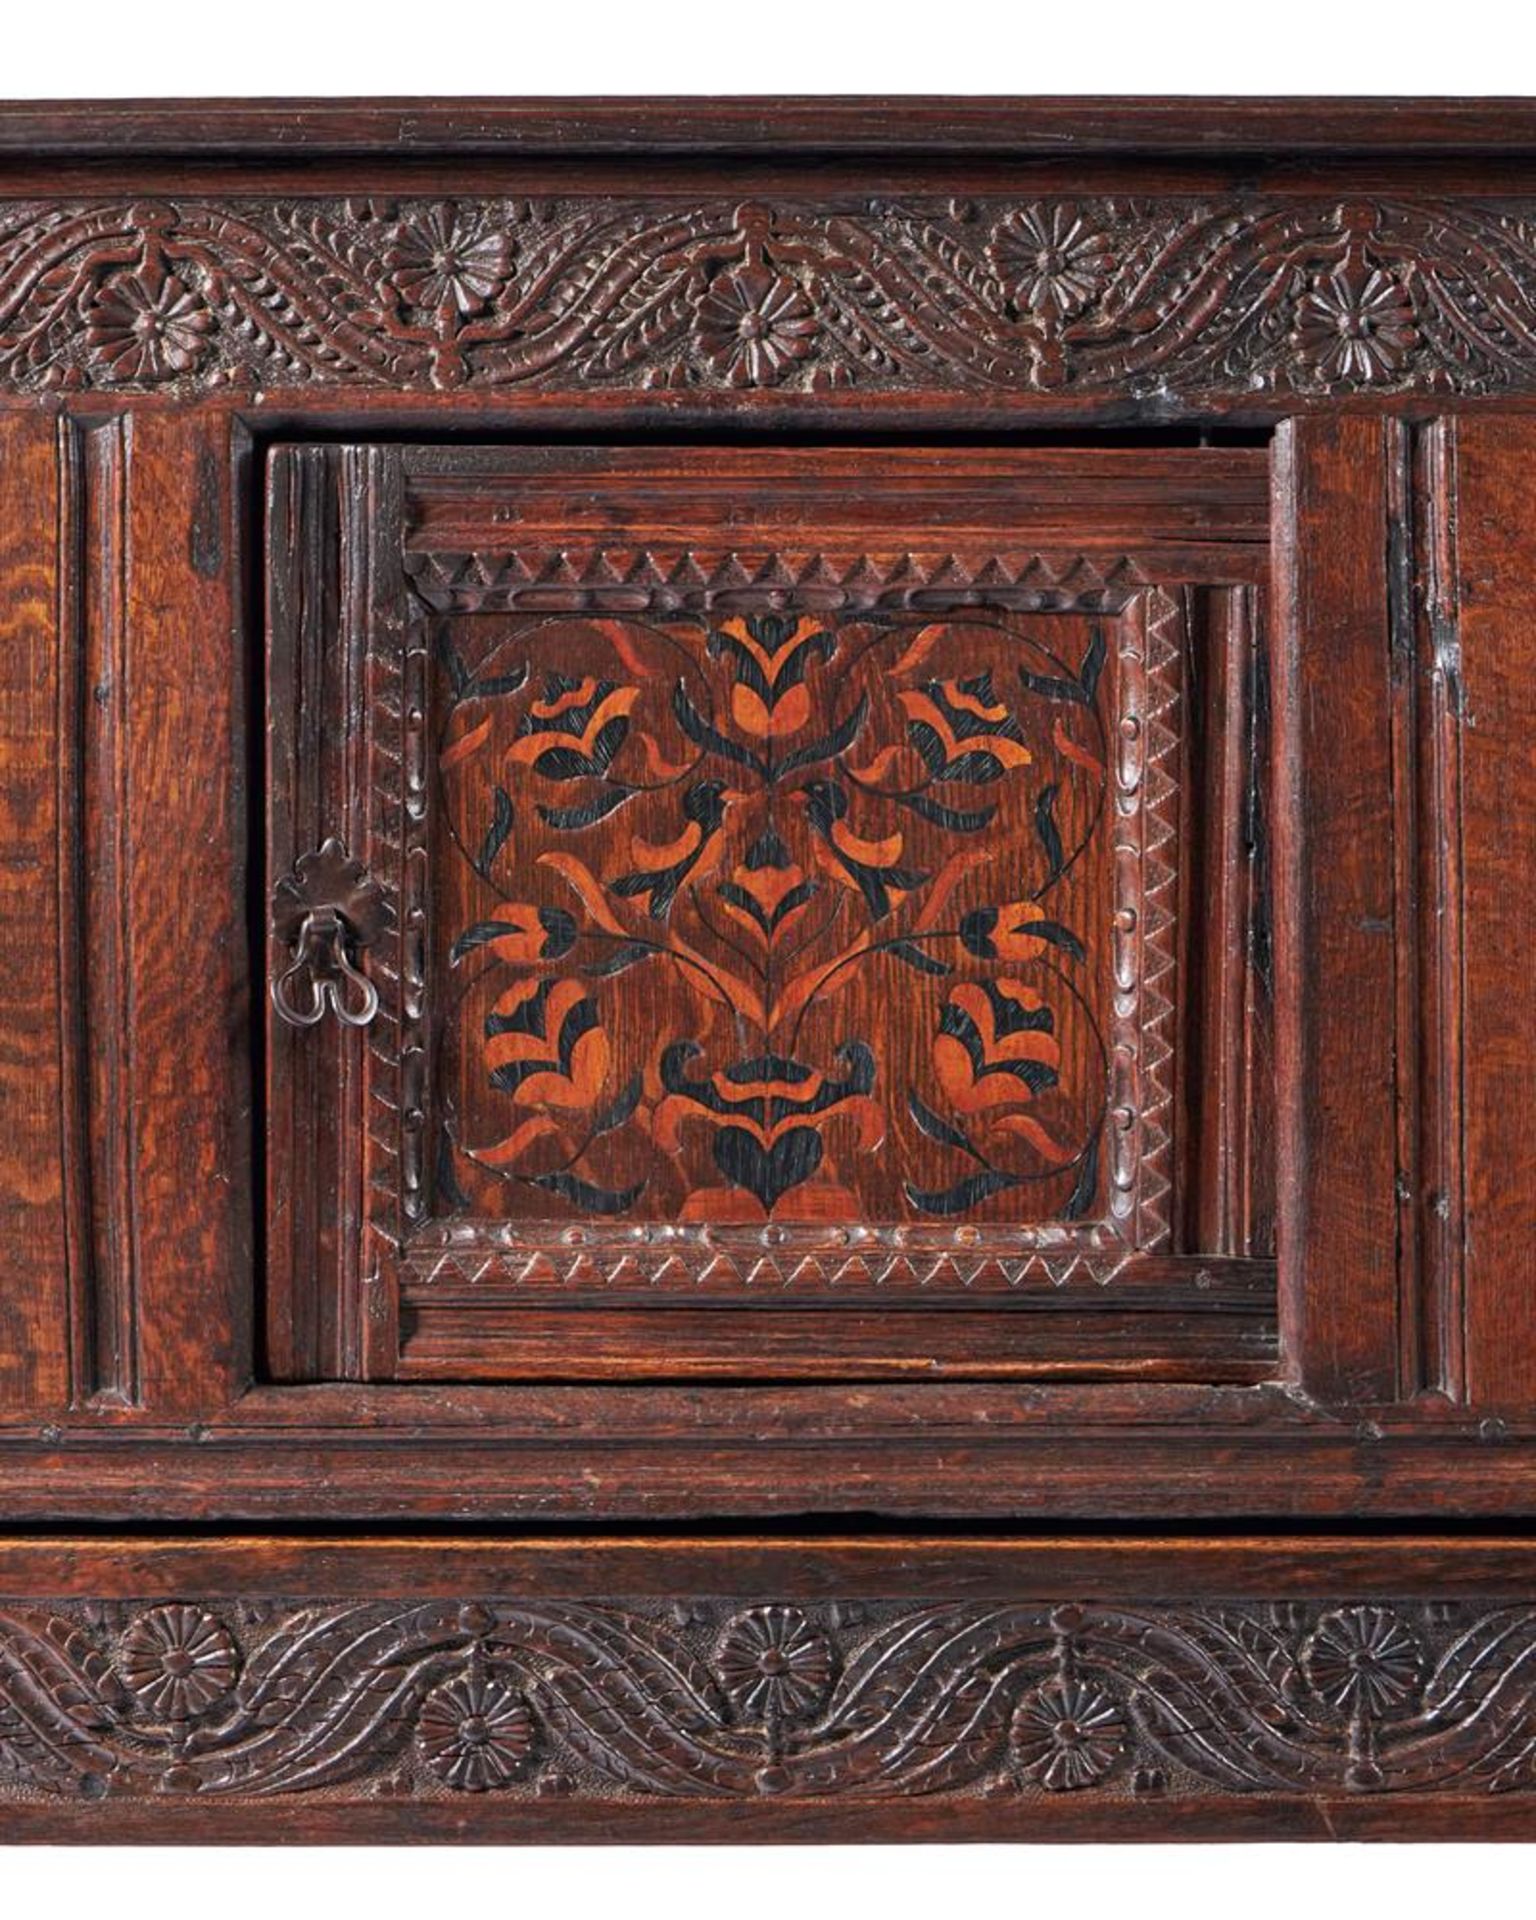 A CHARLES II OAK CUPBOARD OF YORKSHIRE TYPE, 17TH CENTURY - Image 4 of 4